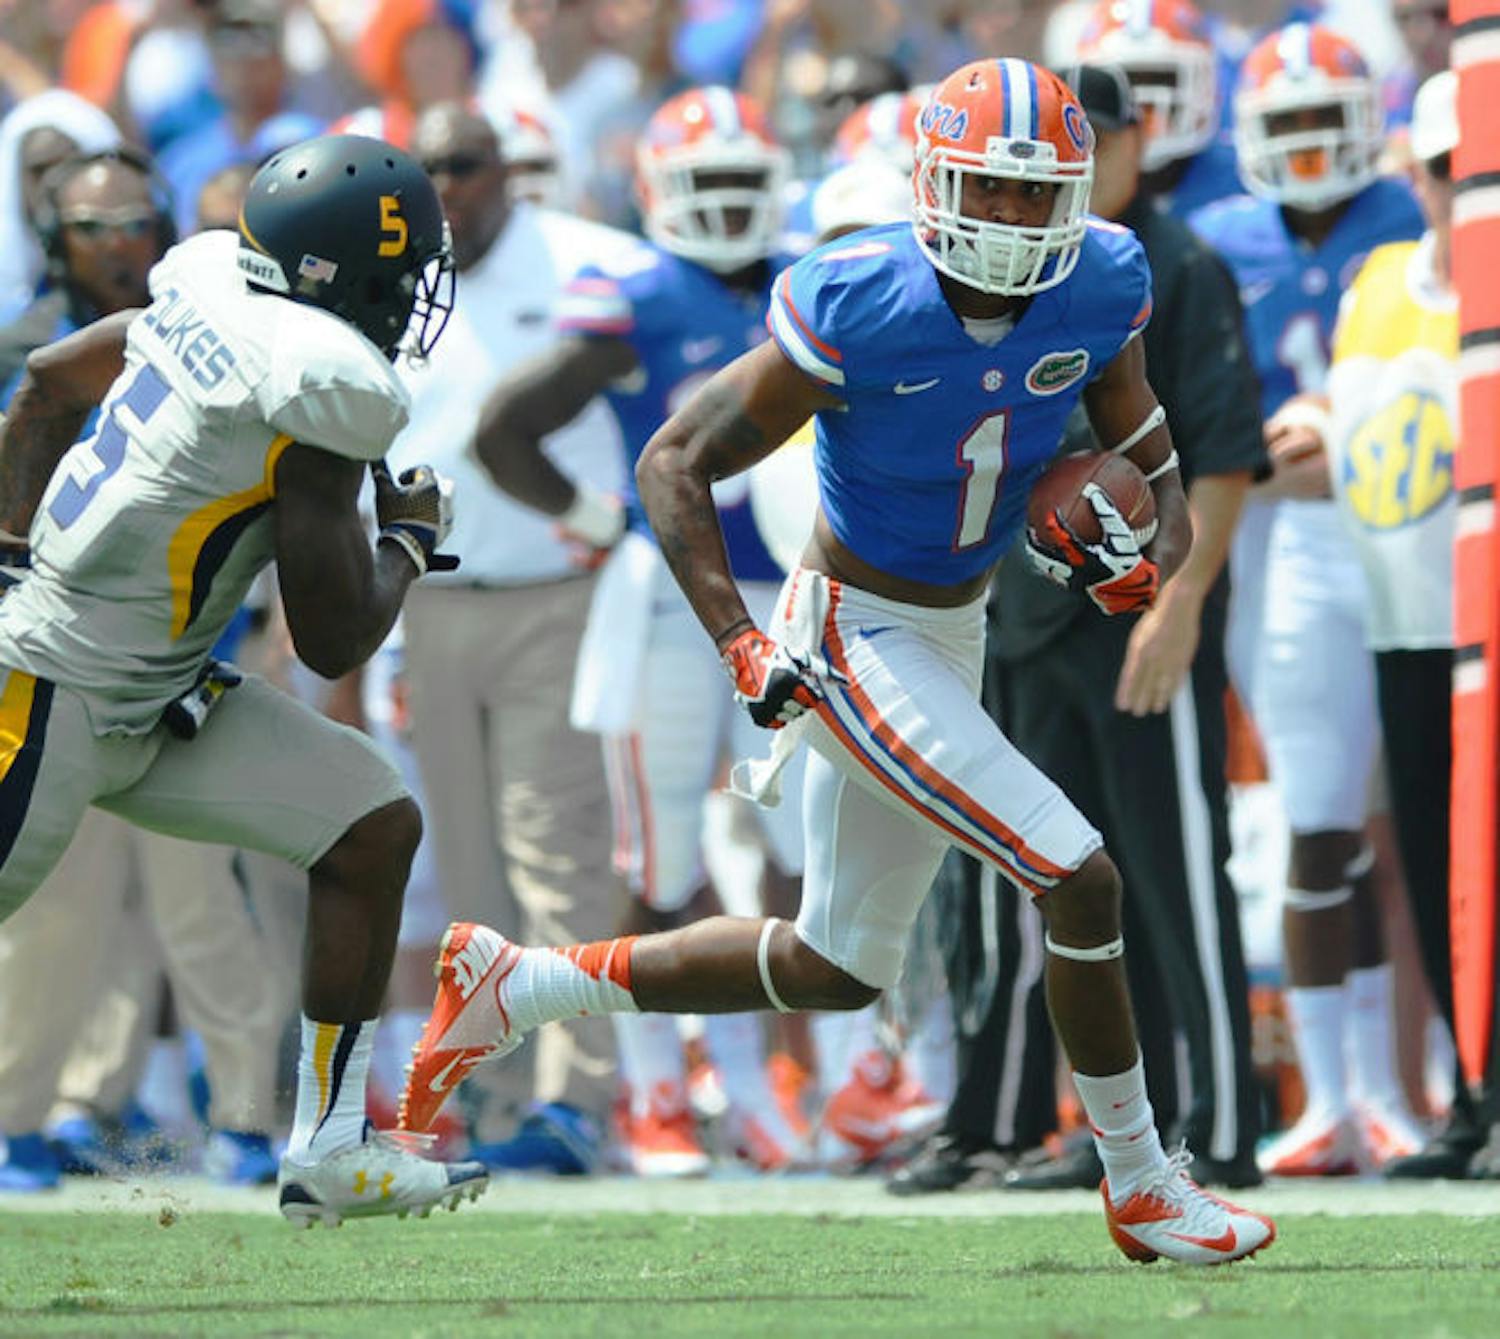 Quinton Dunbar runs past an opposing player during Florida’s 24-6 victory against Toledo on Aug. 31 in Ben Hill Griffin Stadium. Dunbar caught two passes for 22 yards in the game.